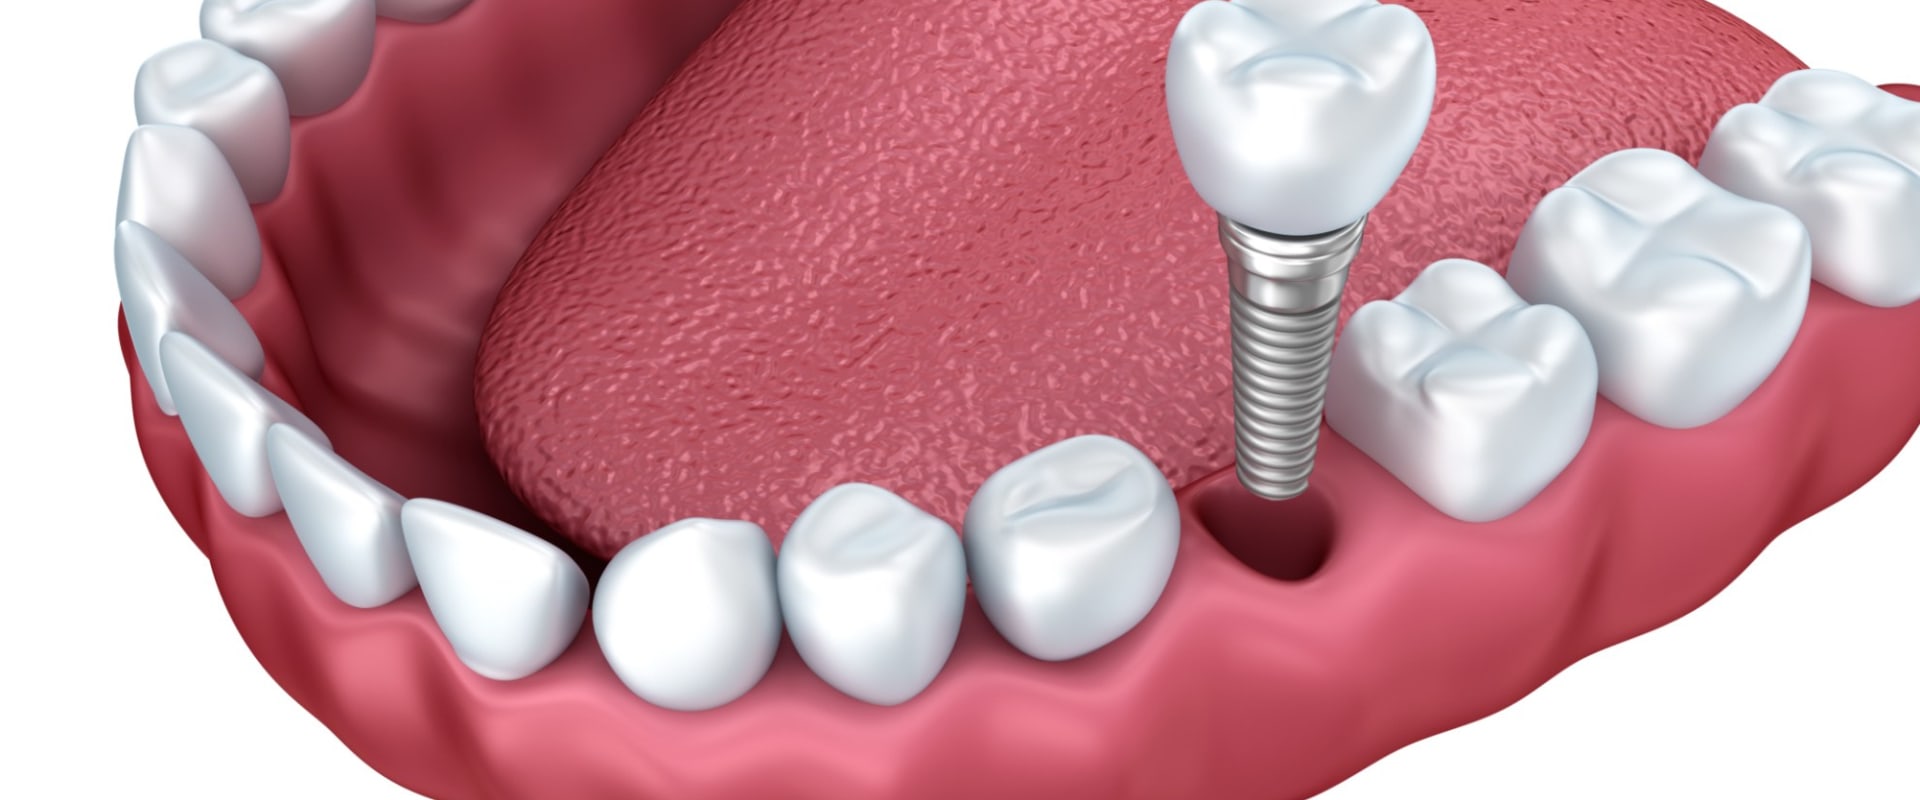 Are dental implants rejected?